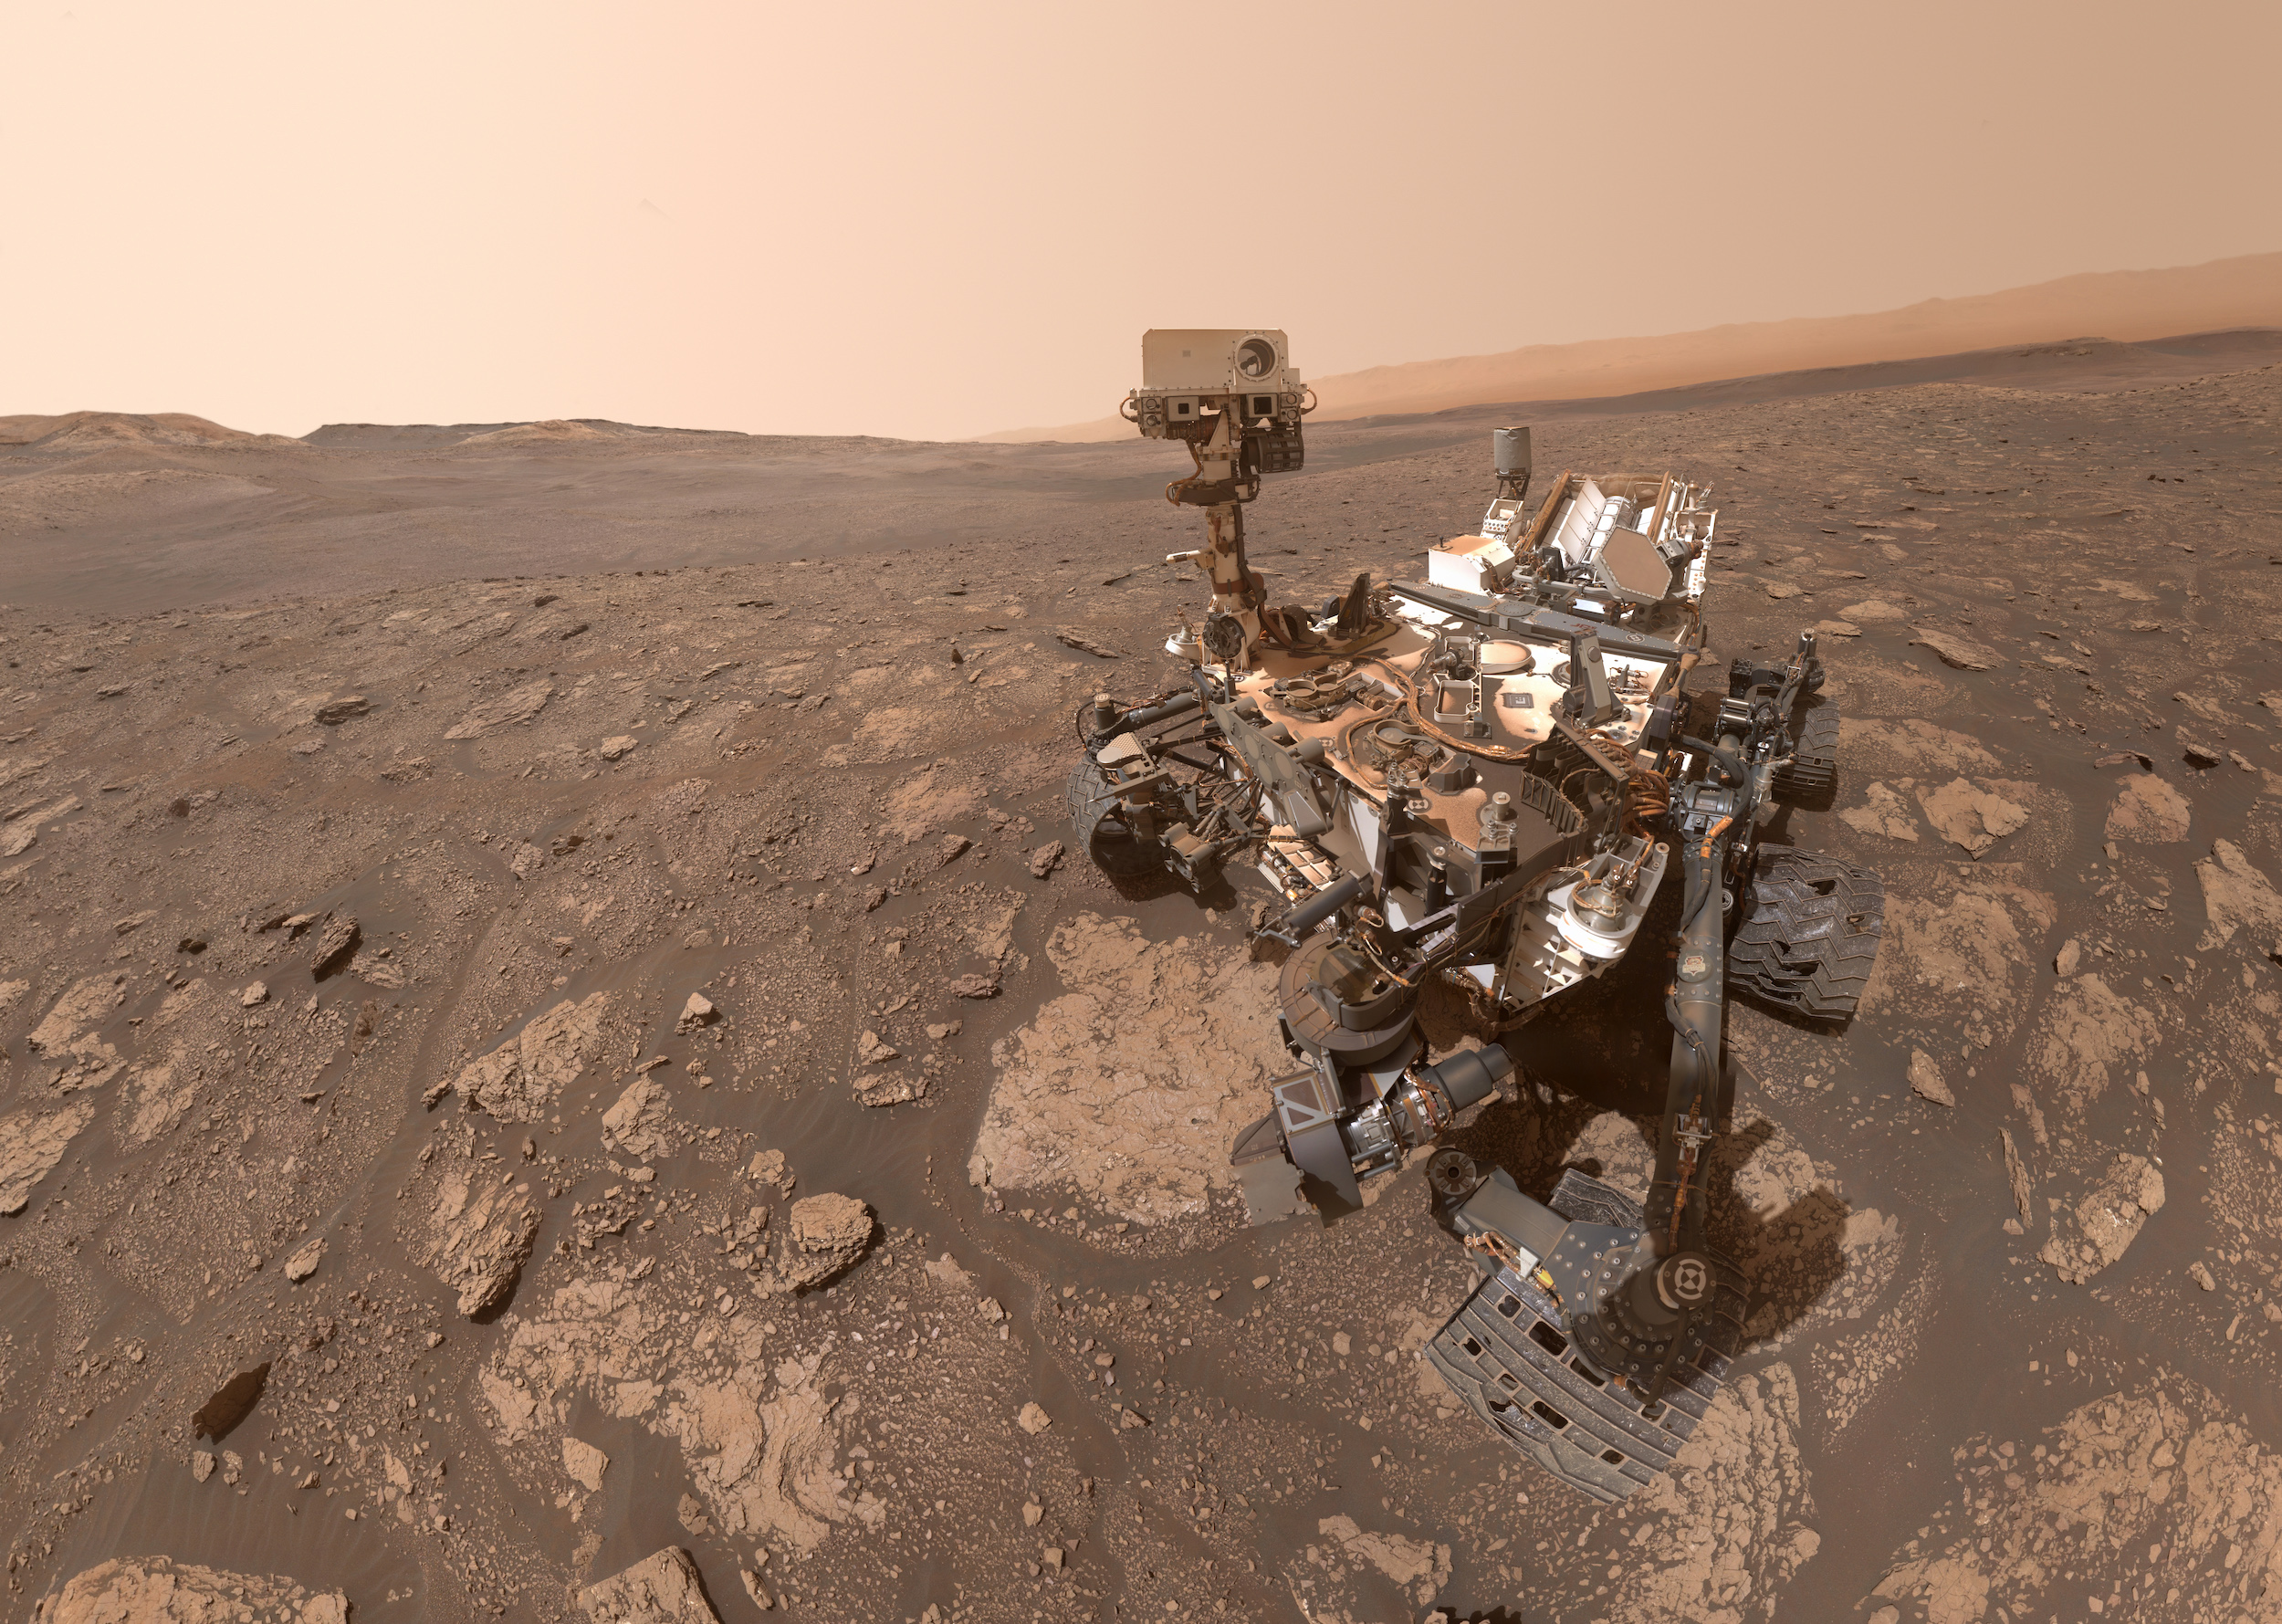 From cameras to environmental and atmospheric sensors, the Curiosity rover has a suite of state-of-the-art science instruments to achieve its goals.